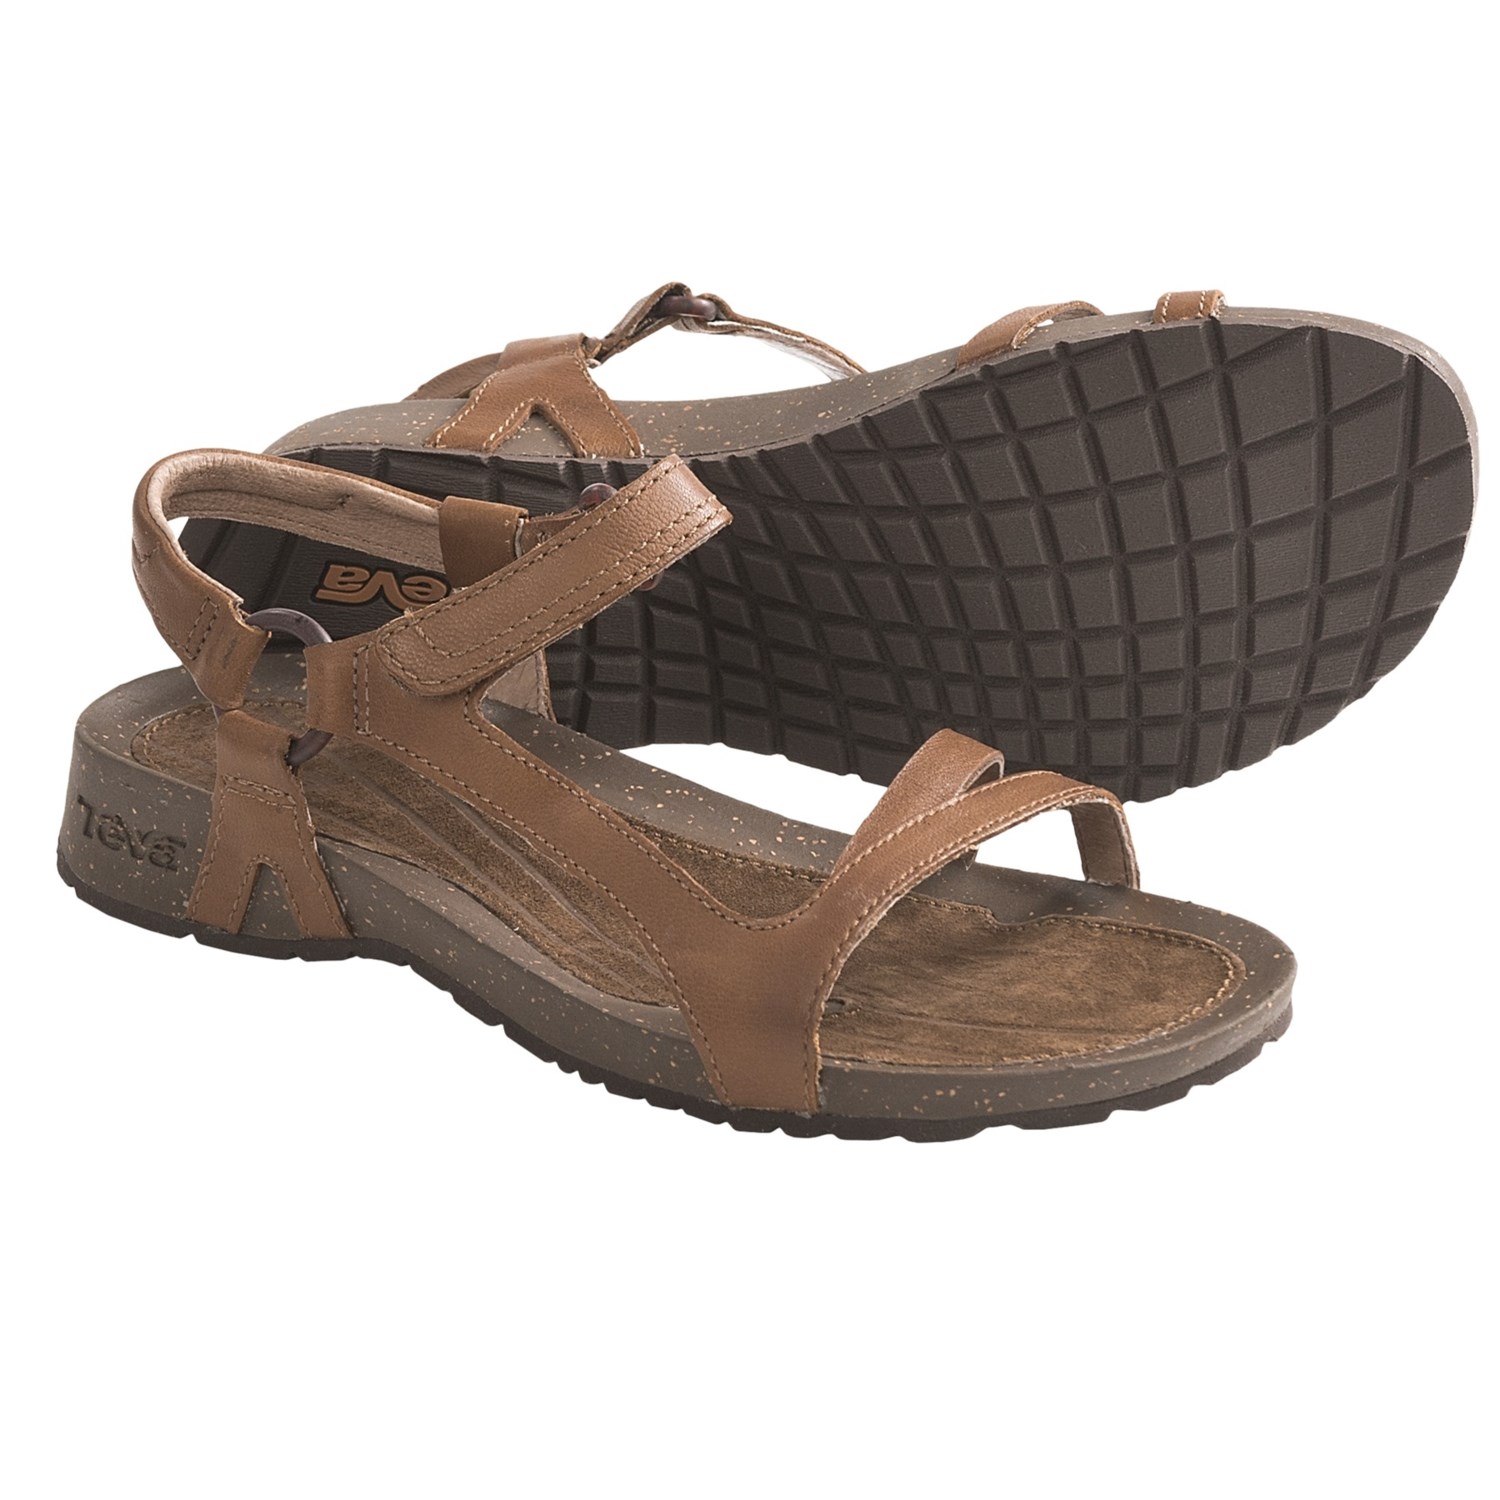 Teva Cabrillo Universal Sandals - Leather (For Women) - Save 35%